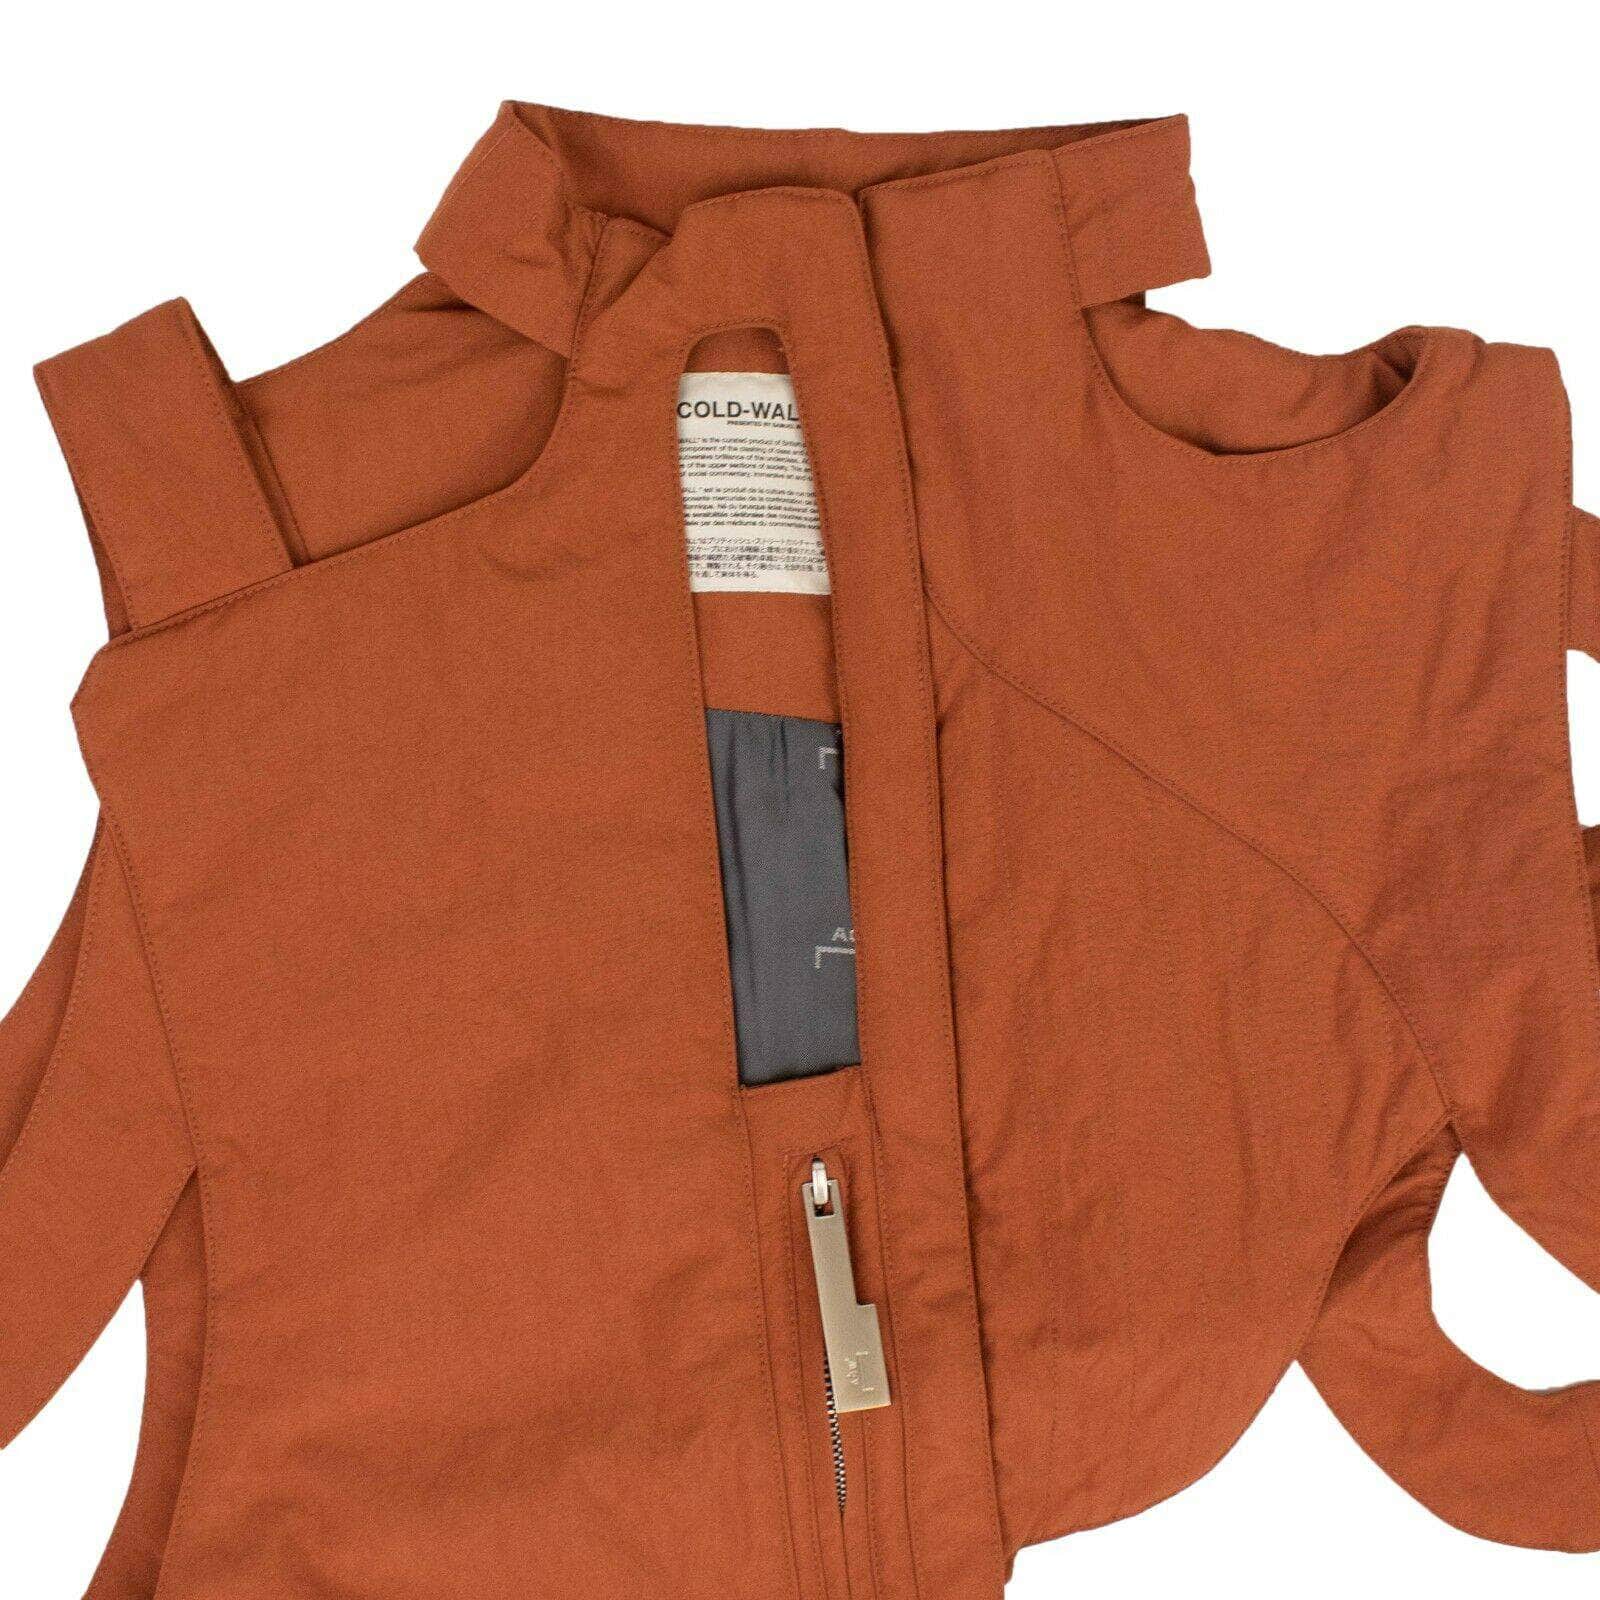 A-COLD-WALL* 750-1000, a-cold-wall, channelenable-all, chicmi, couponcollection, main-clothing, size-m, size-s, uncategorized A-COLD-WALL* Rust Cut-Out Jacket